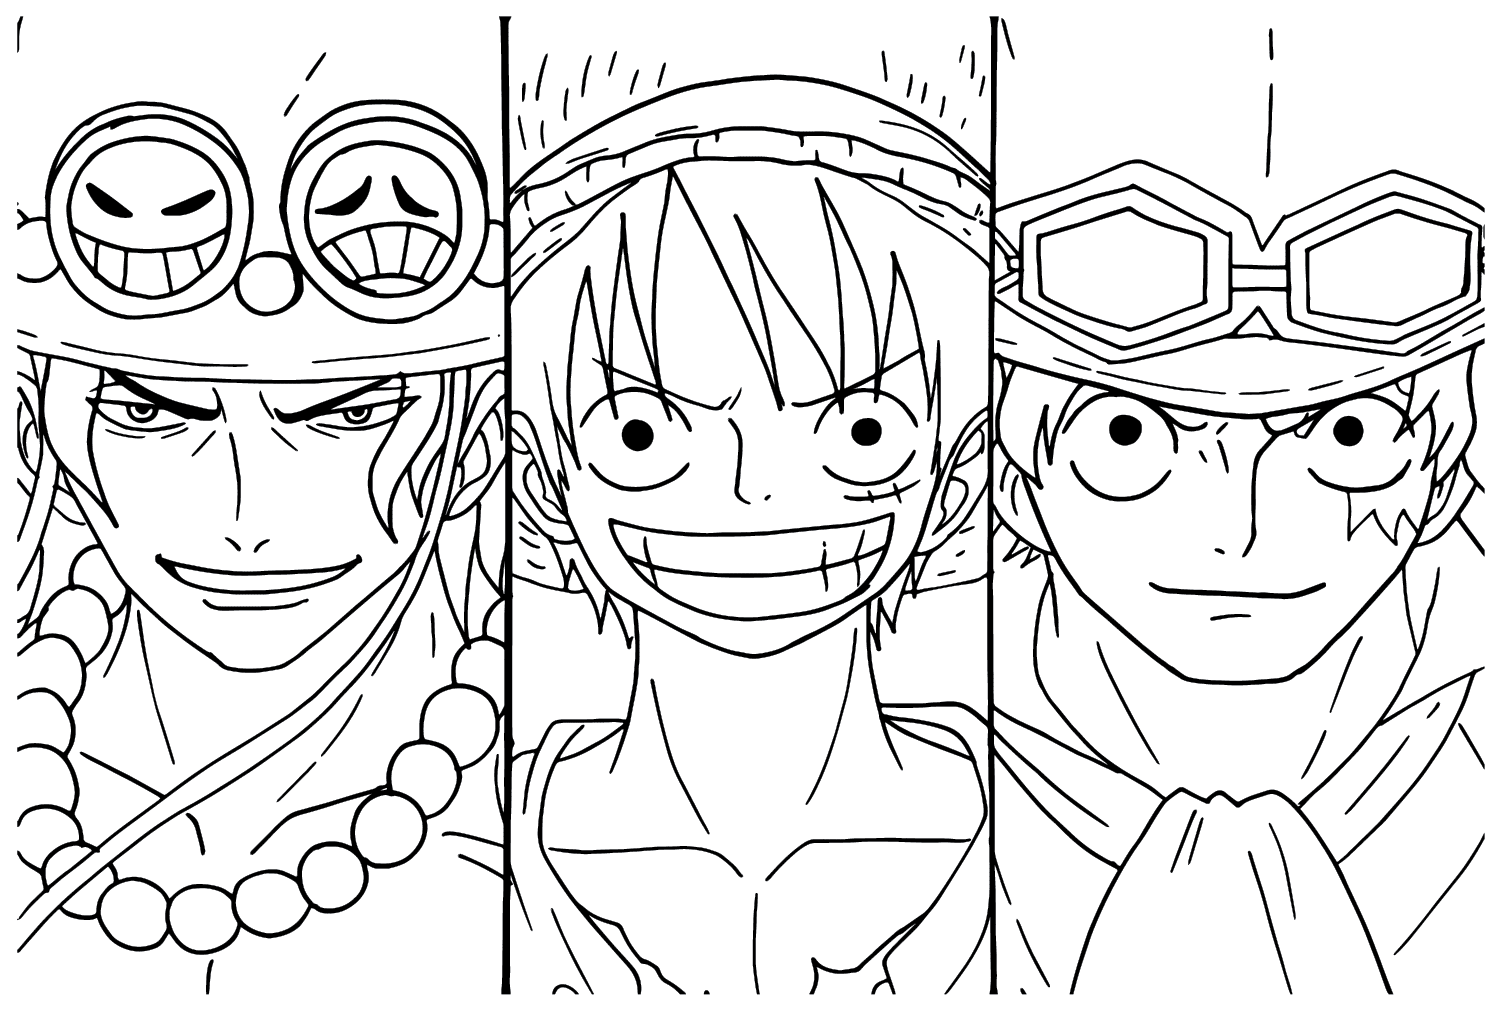 Ace, Luffy, Sabo Coloring Page from Portgas D. Ace